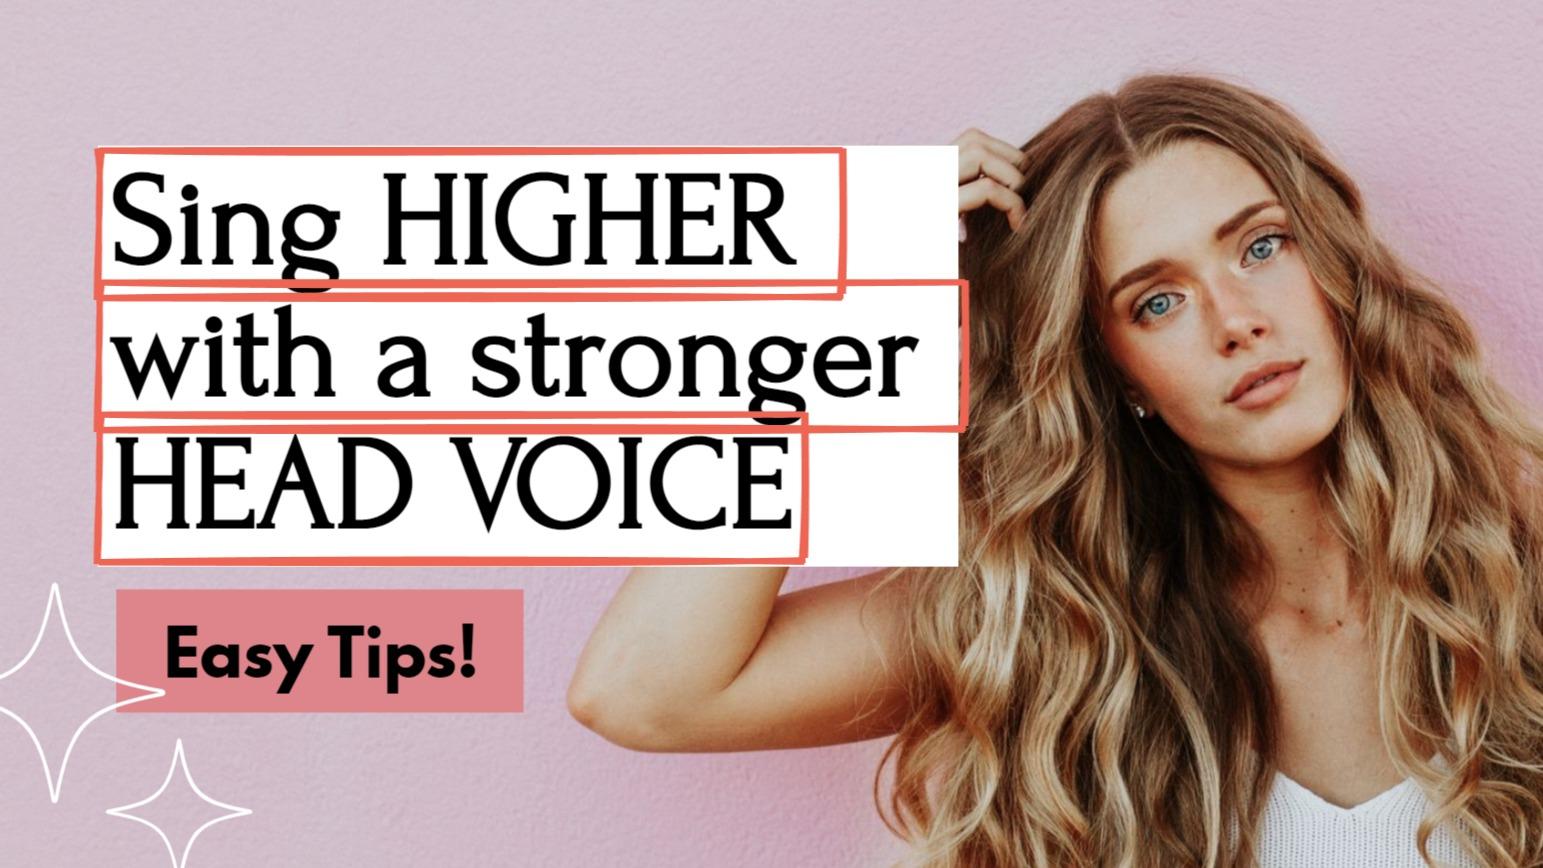 Want to sing higher? Train your head voice!